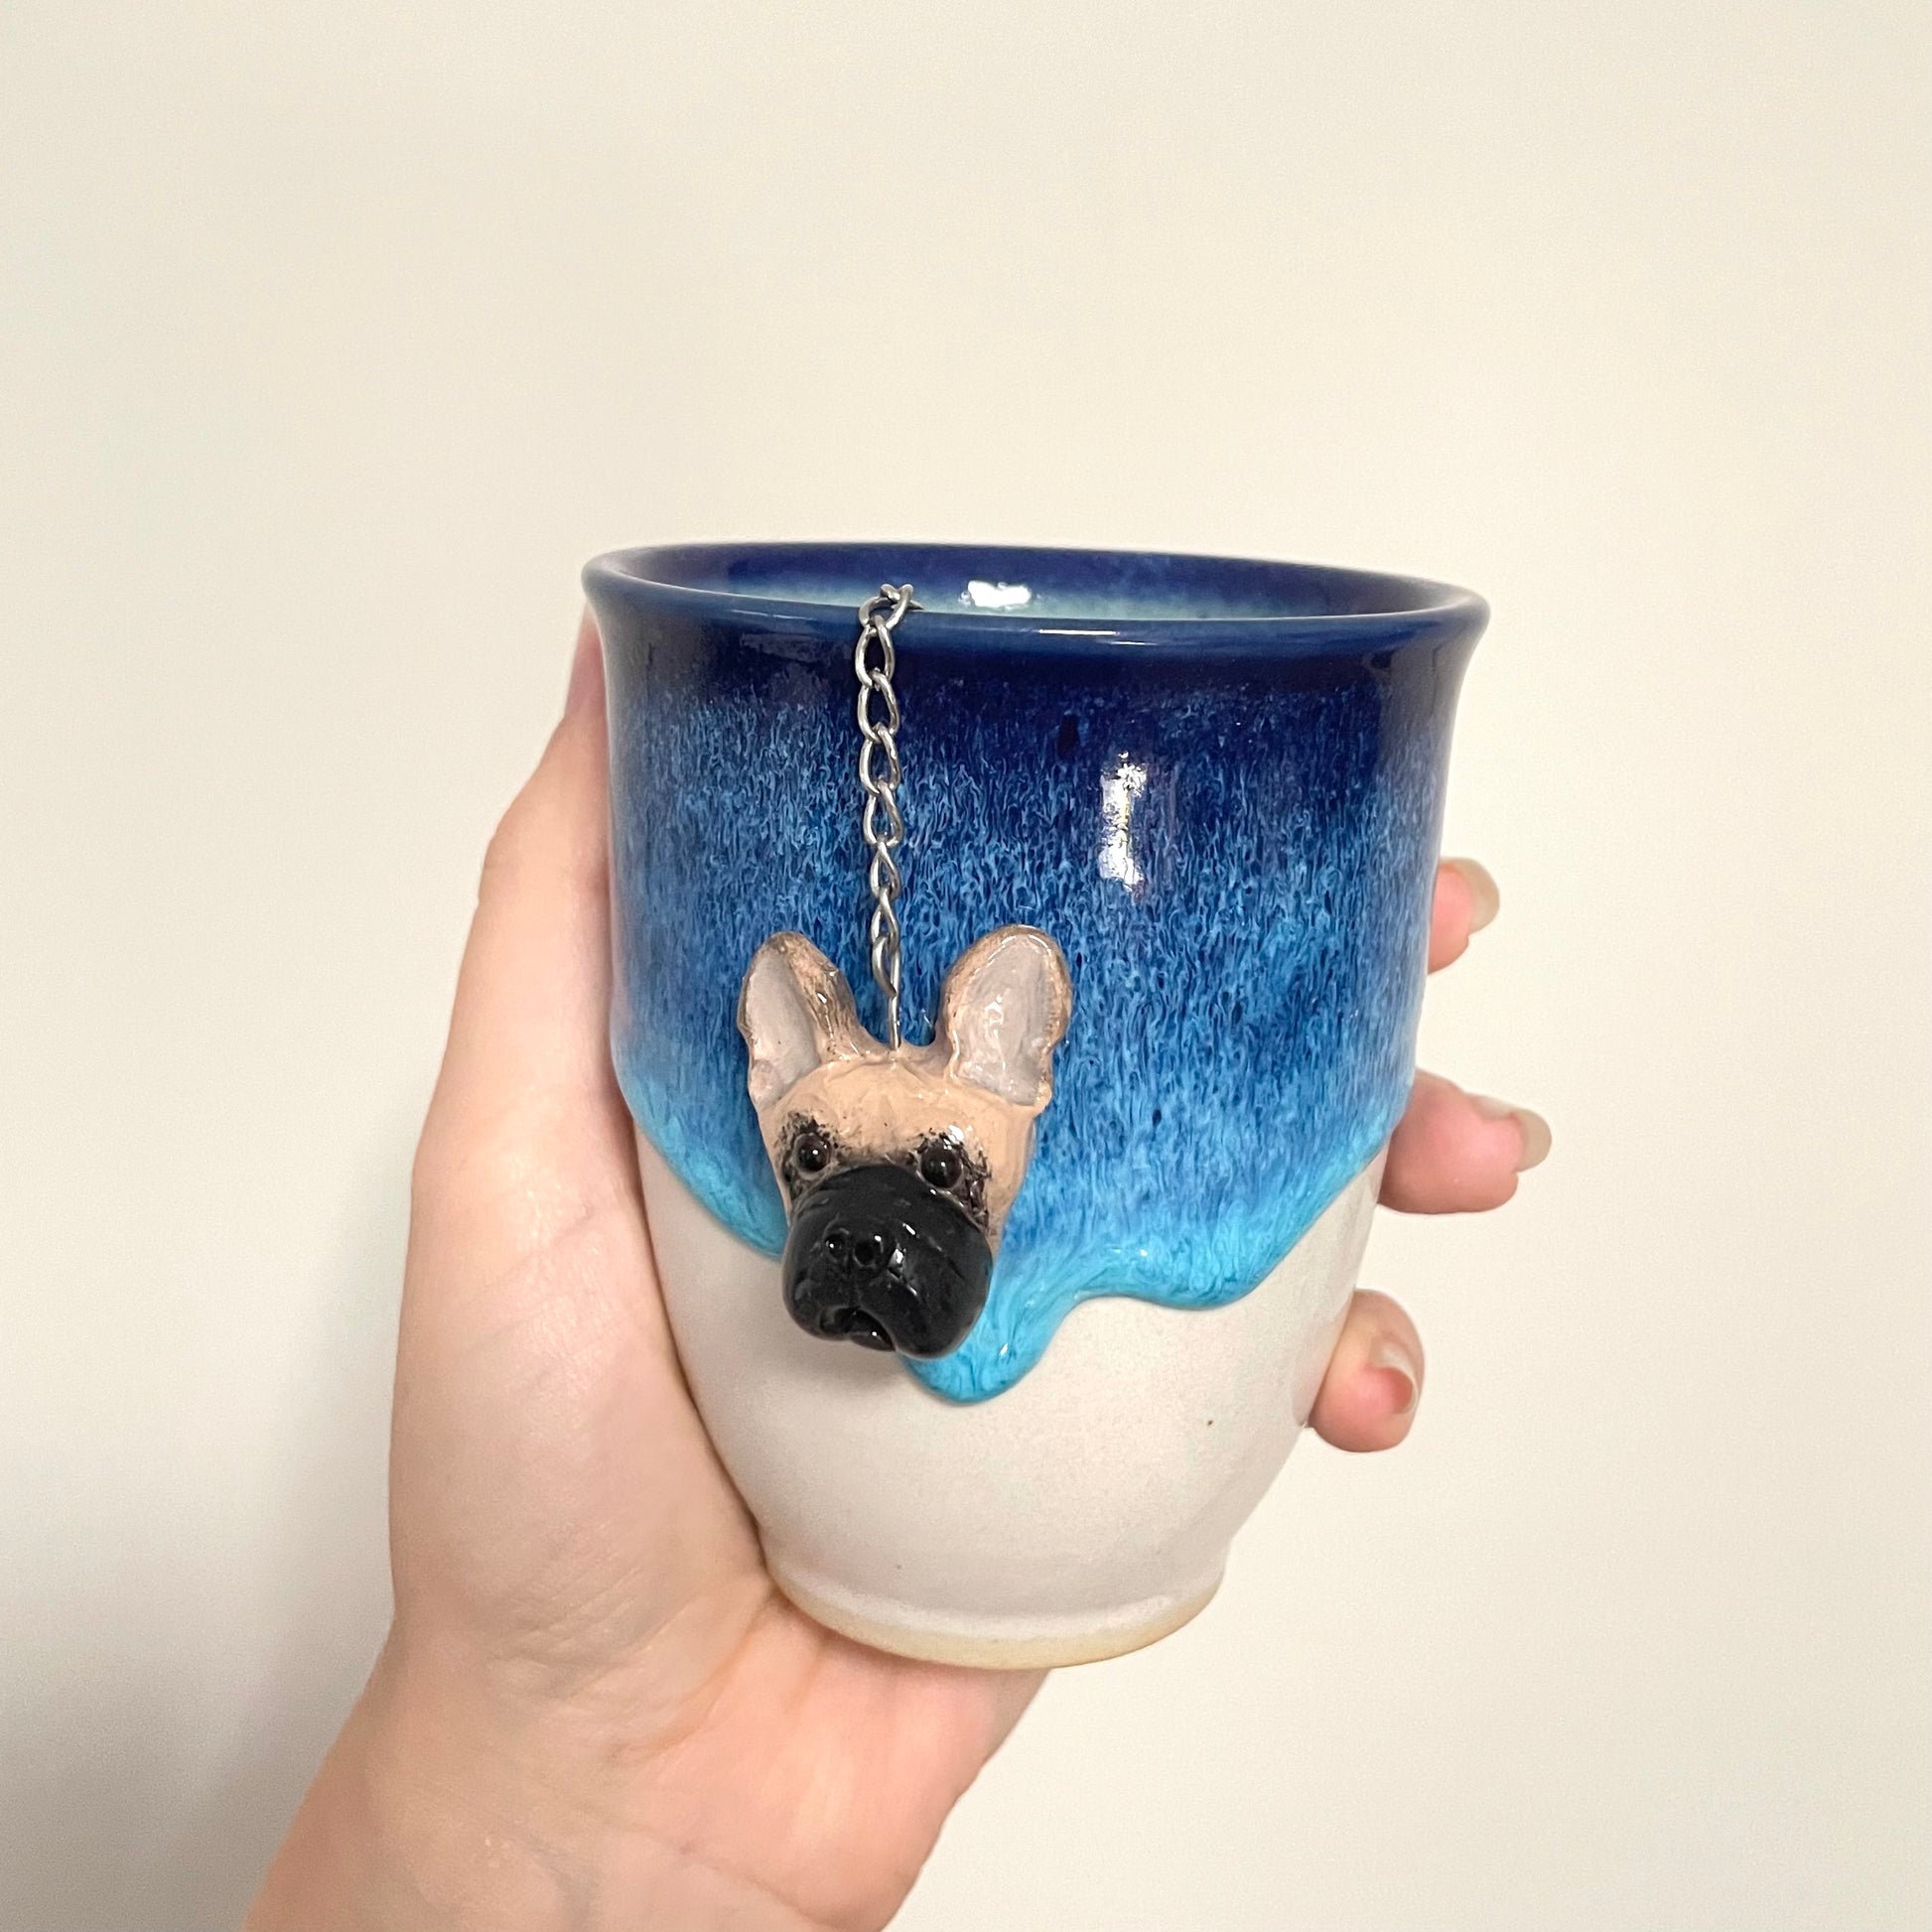 Handmade custom pet face mesh ball tea strainer being used in a blue ceramic cup.